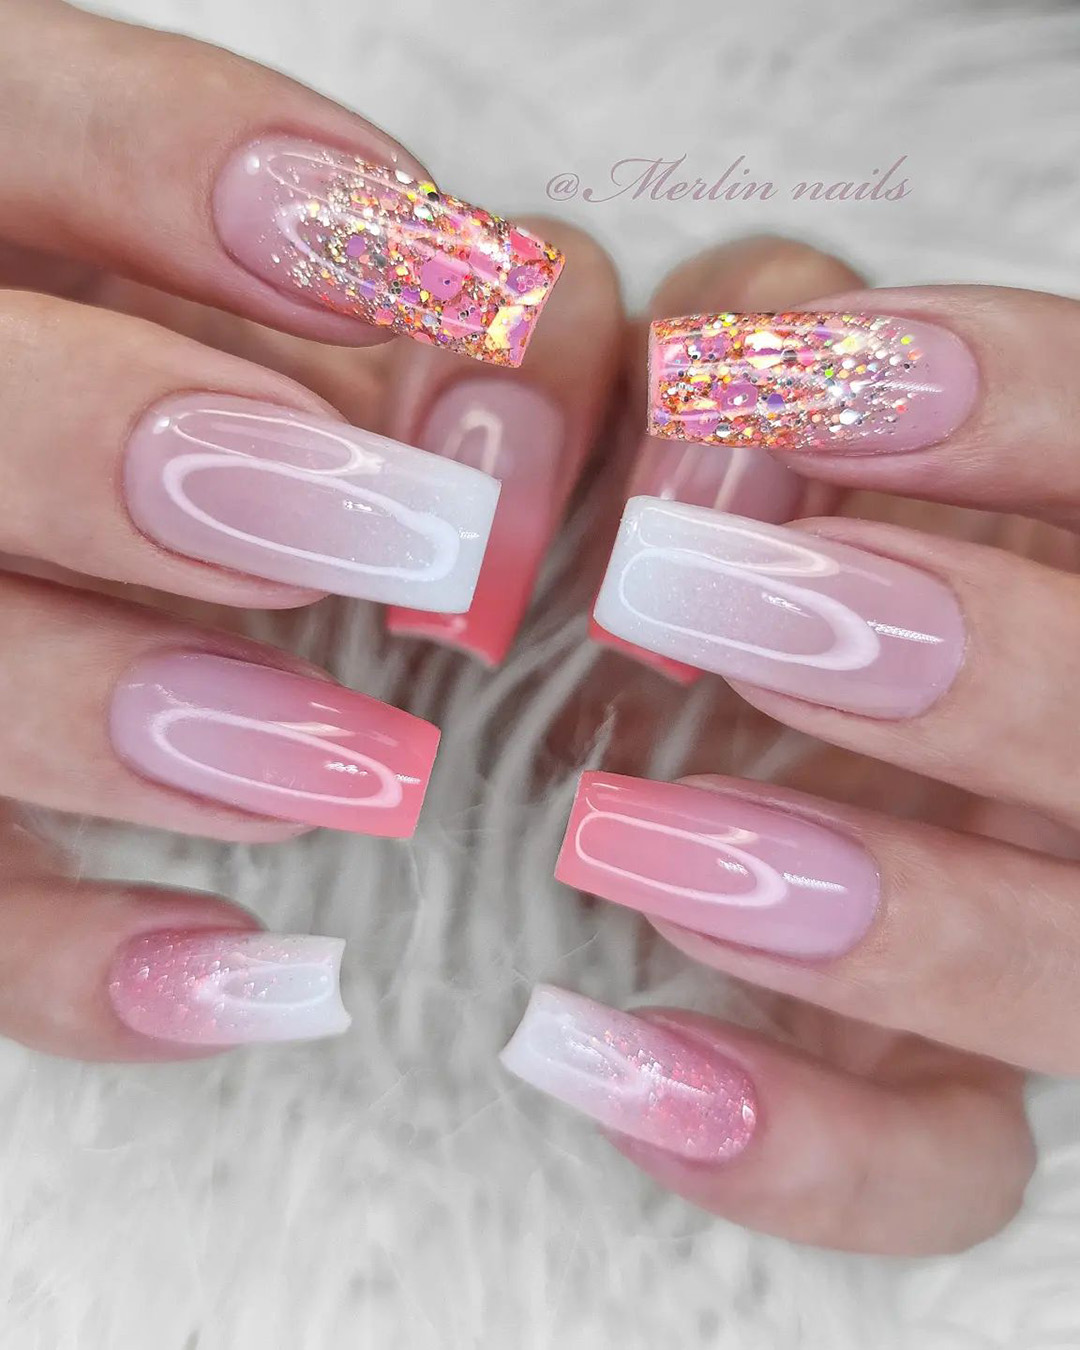 pink and white nails wedding light ombre with glitter merlin_nails